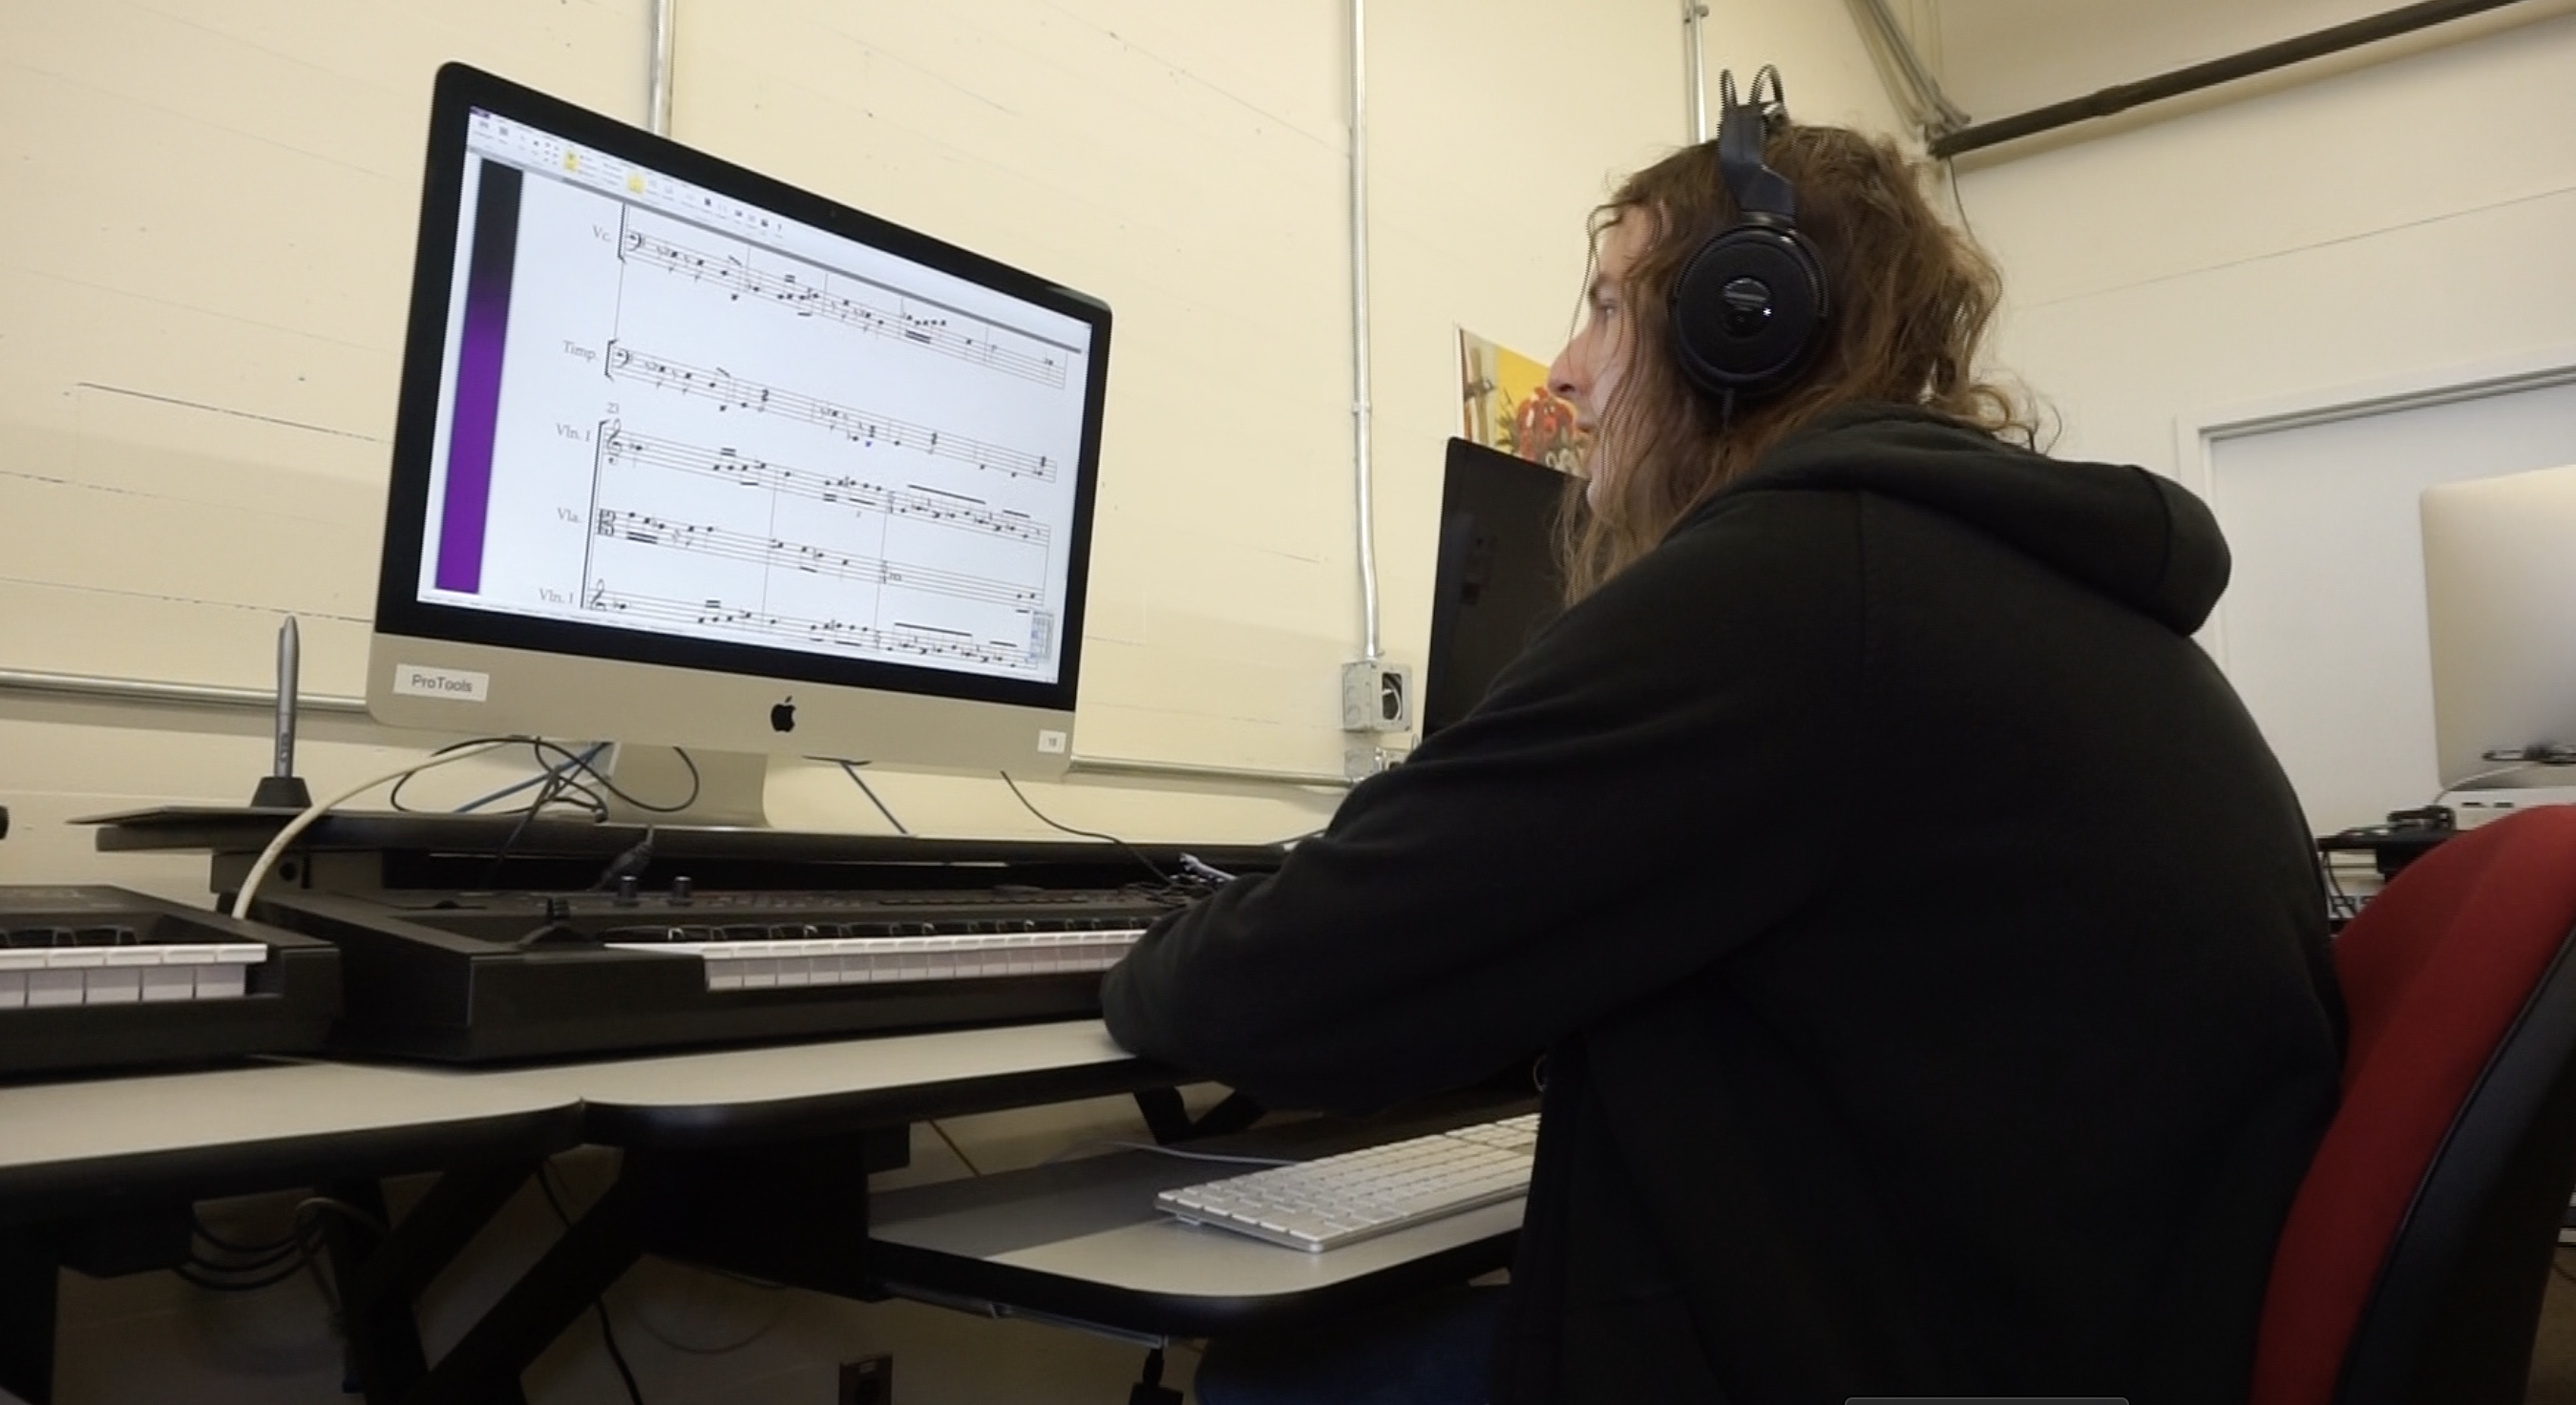 Music composition major working on computer at Worcester State